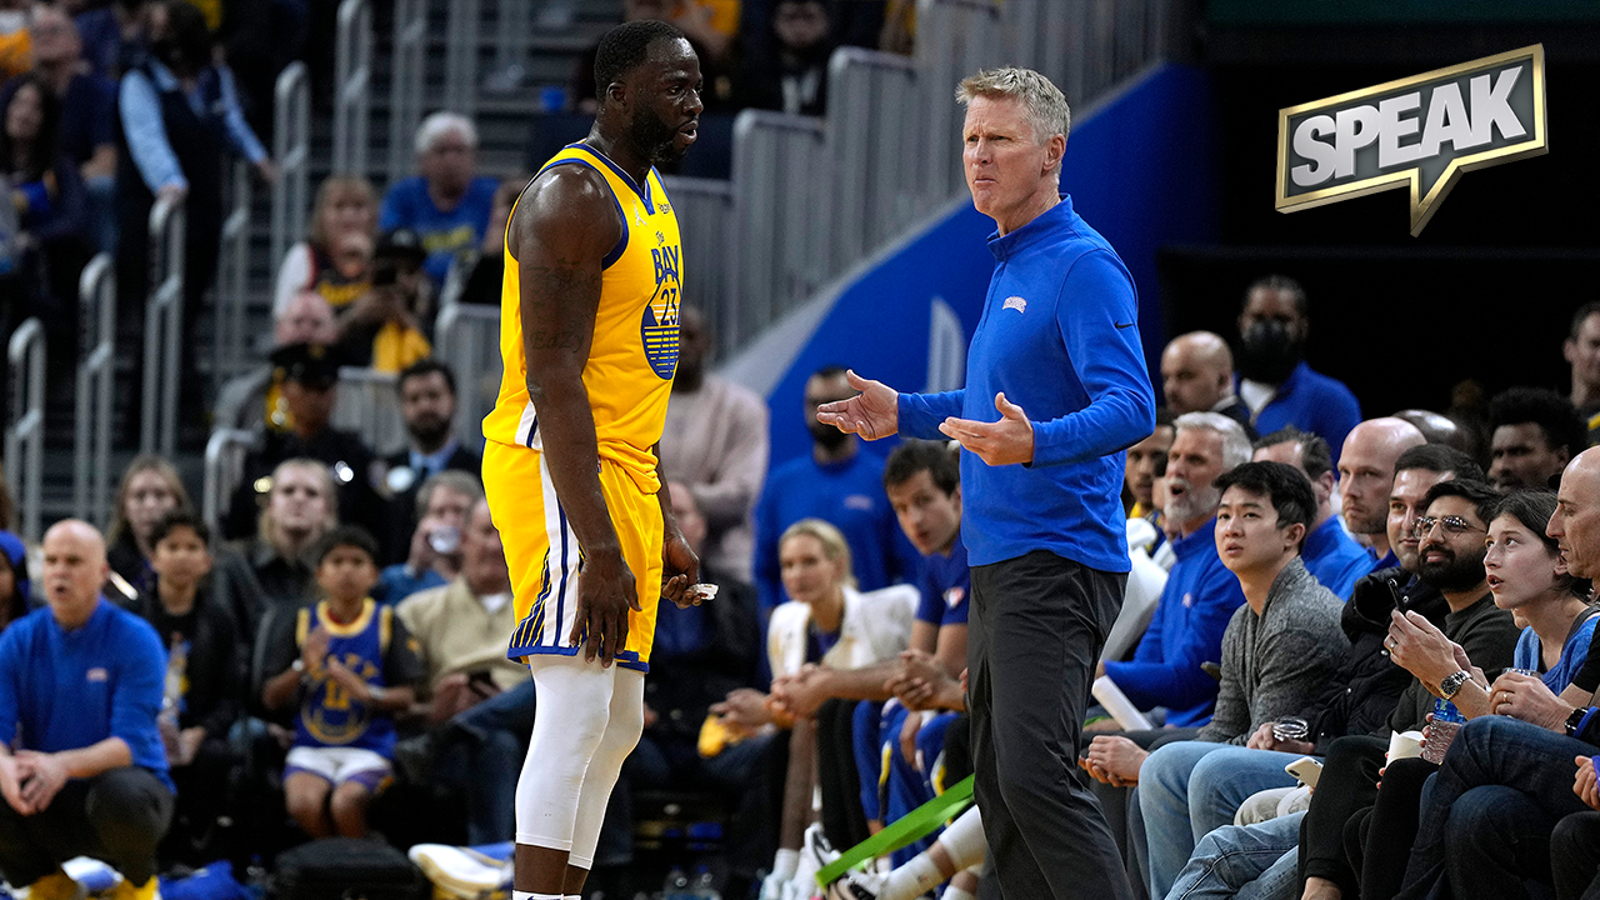 Did the Golden State Warriors handle the Draymond Green situation well? | SPEAK